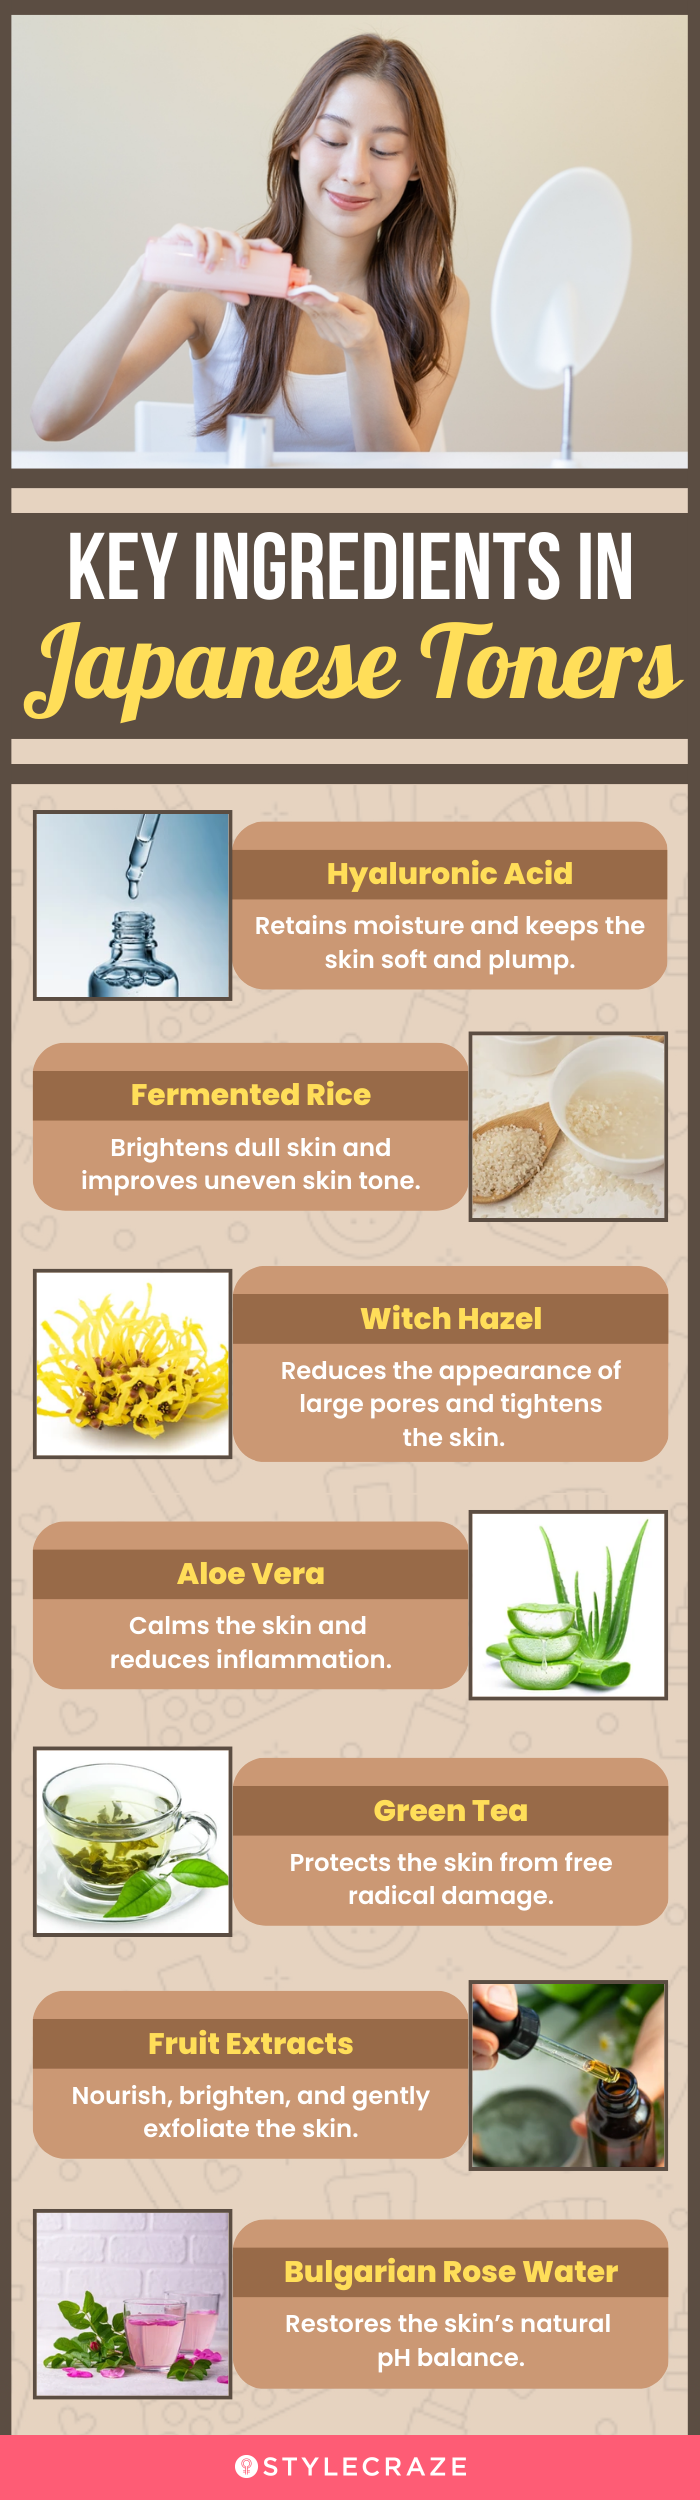 Key Ingredients In Japanese Toners (infographic)